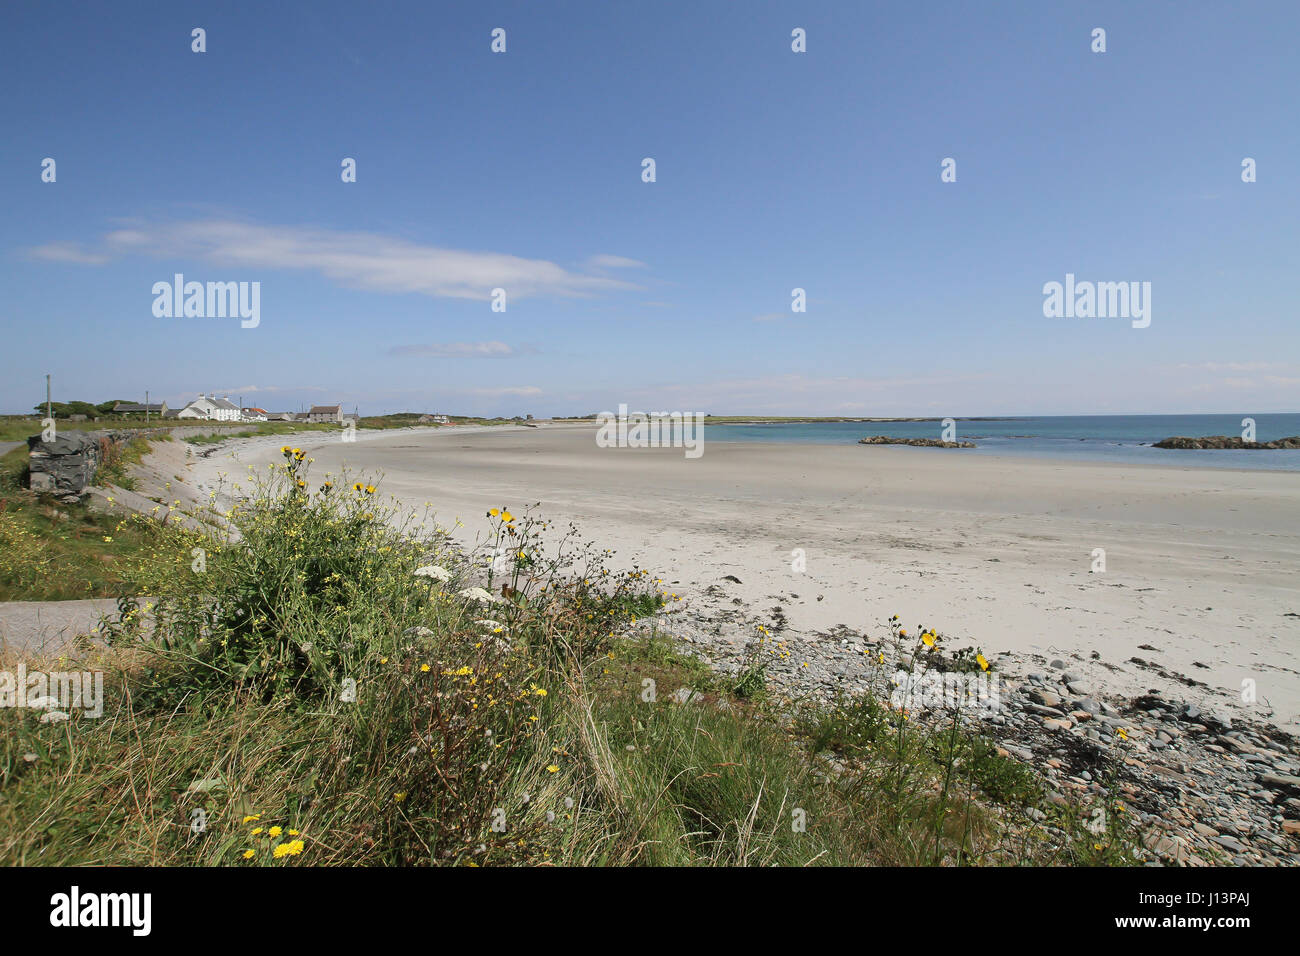 Sandy beach on County Down coast, Northern Ireland. The beach is at Kearney, near the village of Portaferry on the Ards Peninsula, County Down. Stock Photo